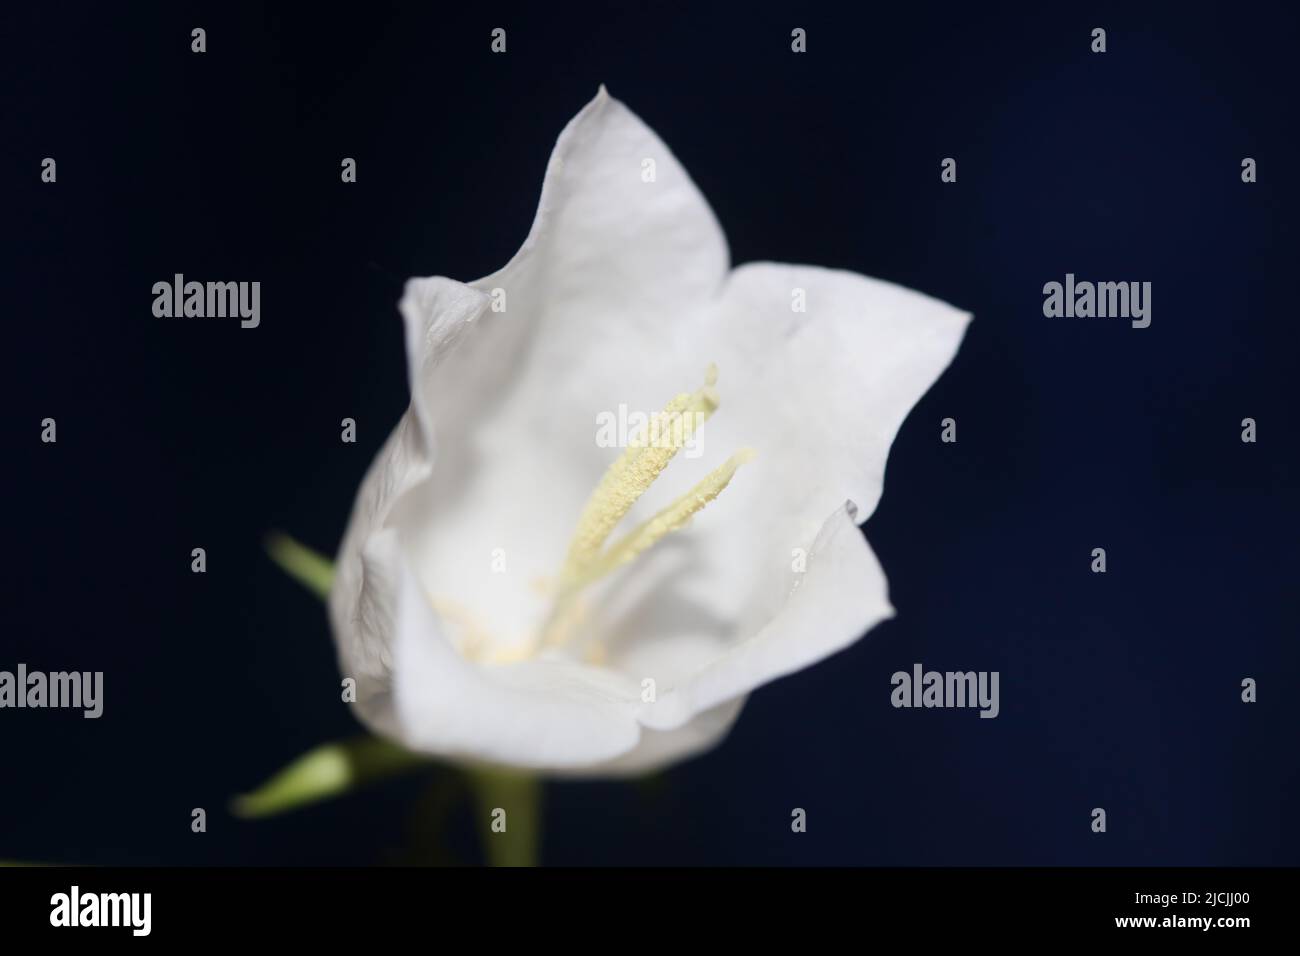 White flower blossoming close up Campanula persicifolia family campanulaceae high quality big size print shop wall posters home decor natural plant Stock Photo